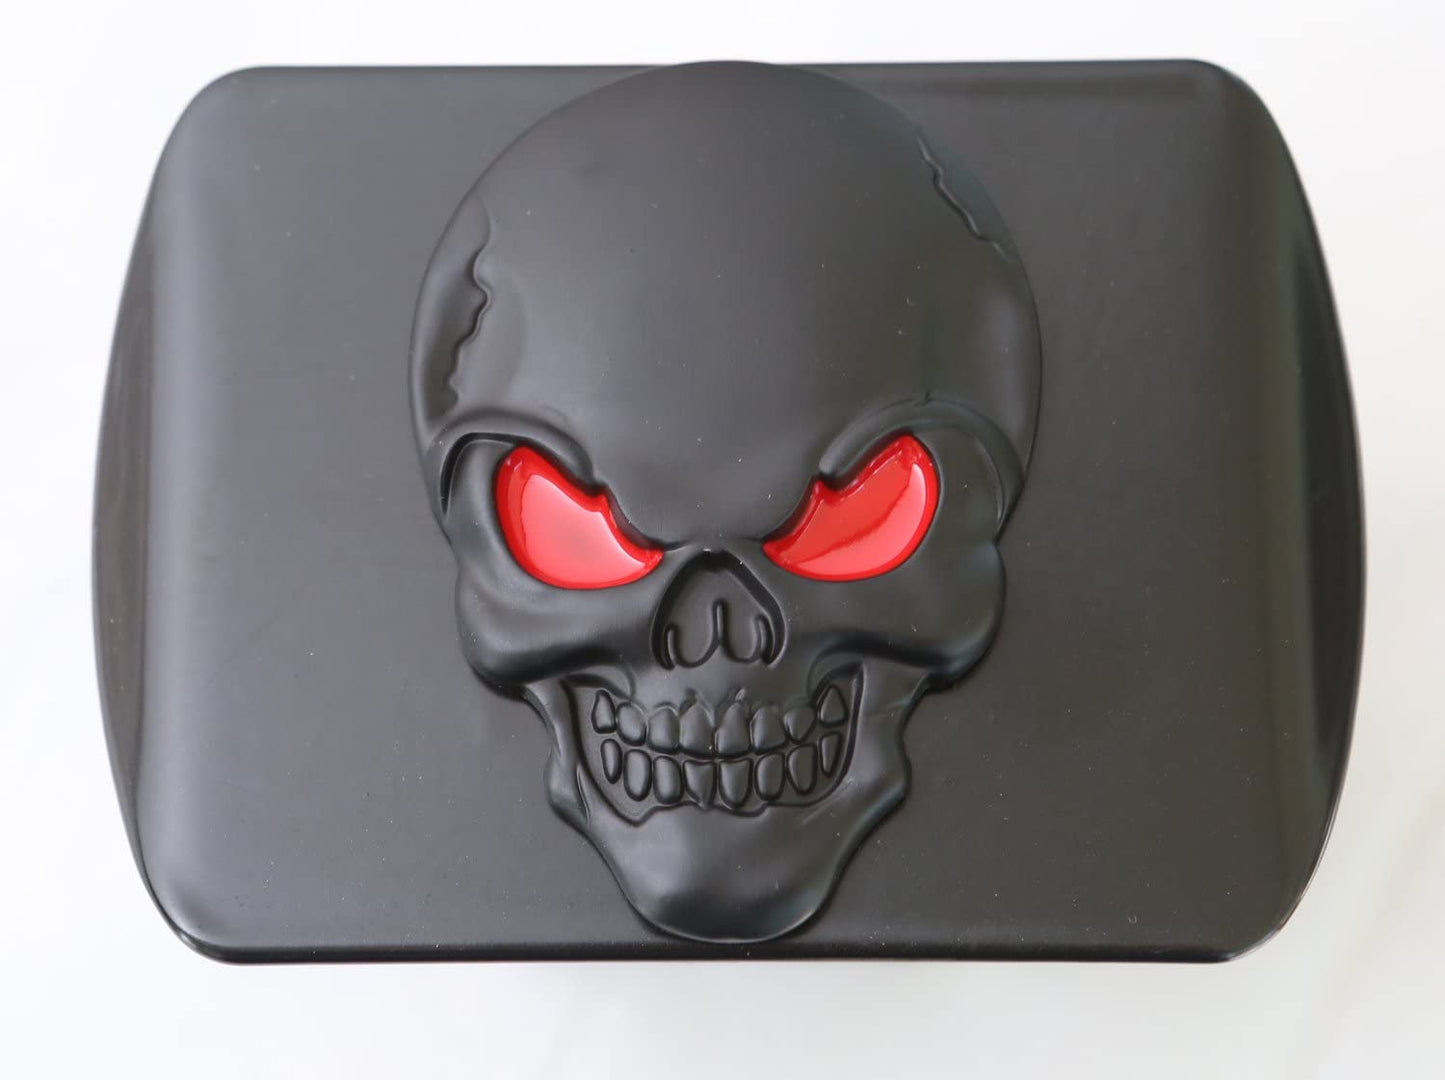 LFPartS Metal Skull Emblem Hitch Cover Red Eyes